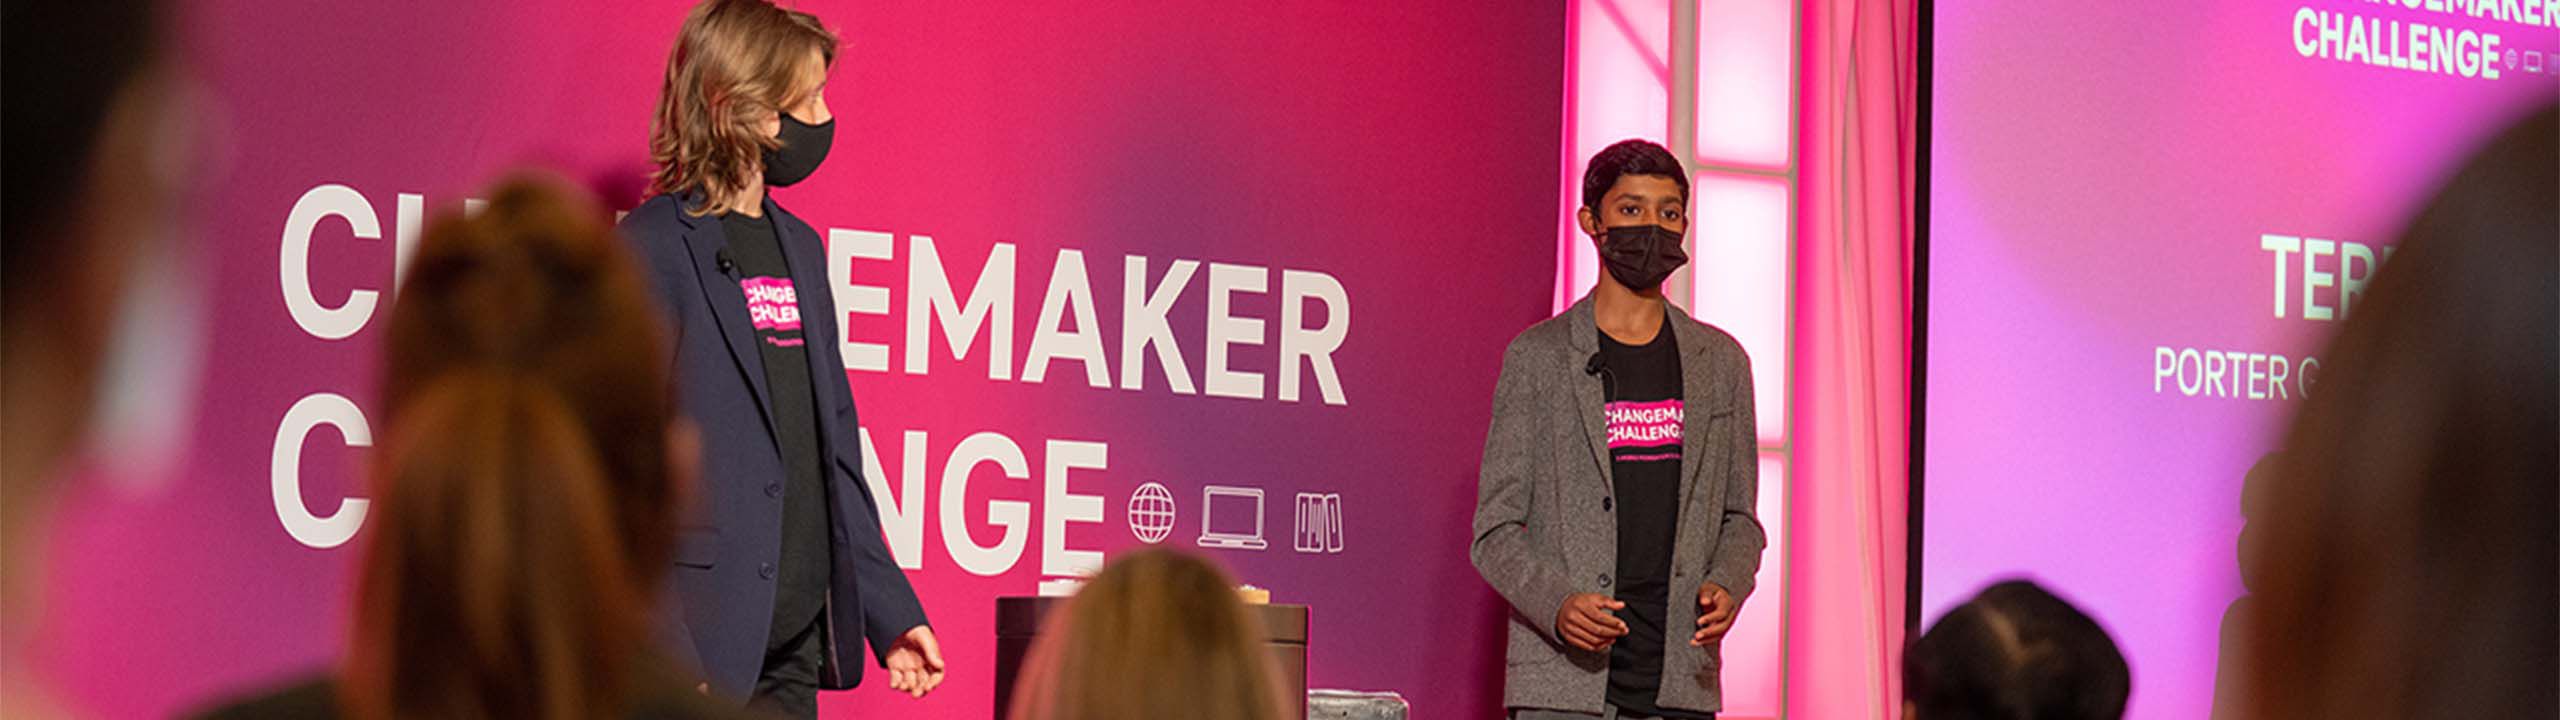 Changermaker Students at the T-Mobile HQ